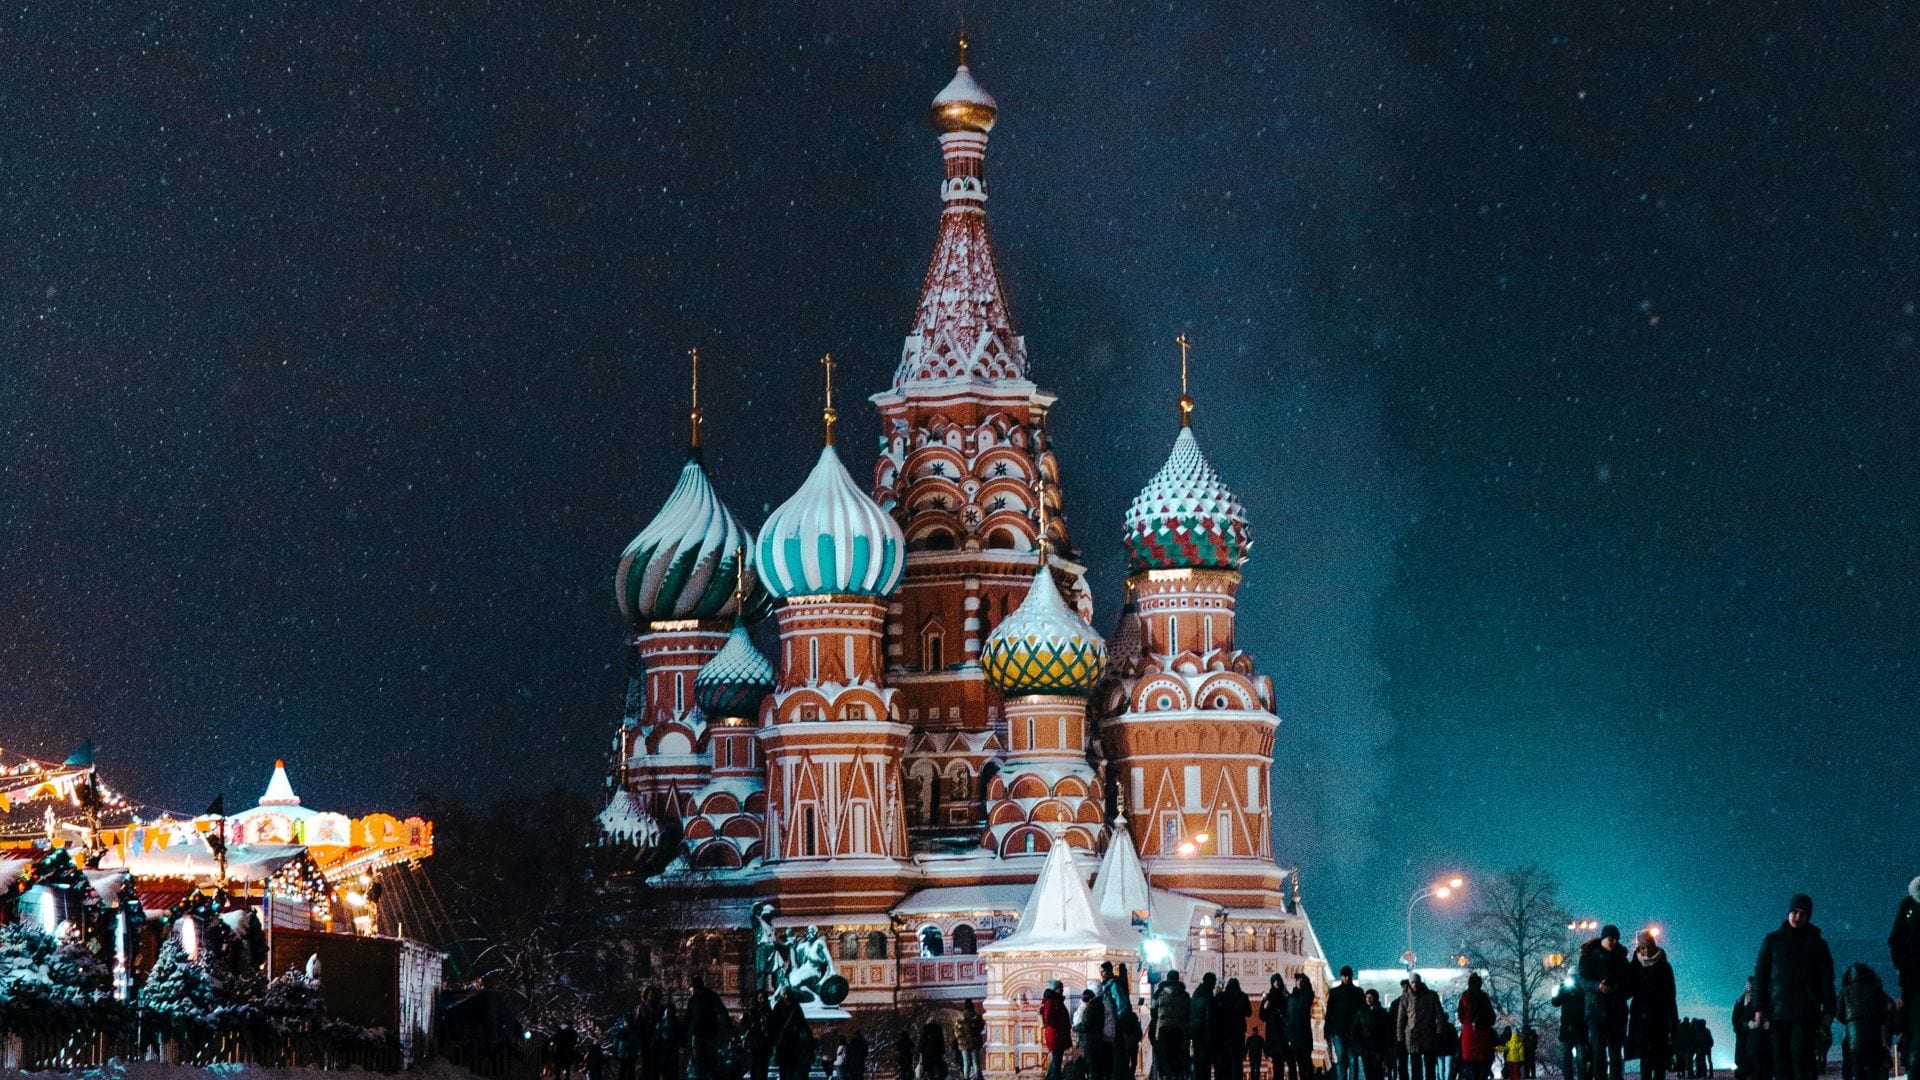 Moscow case study - liberty without borders